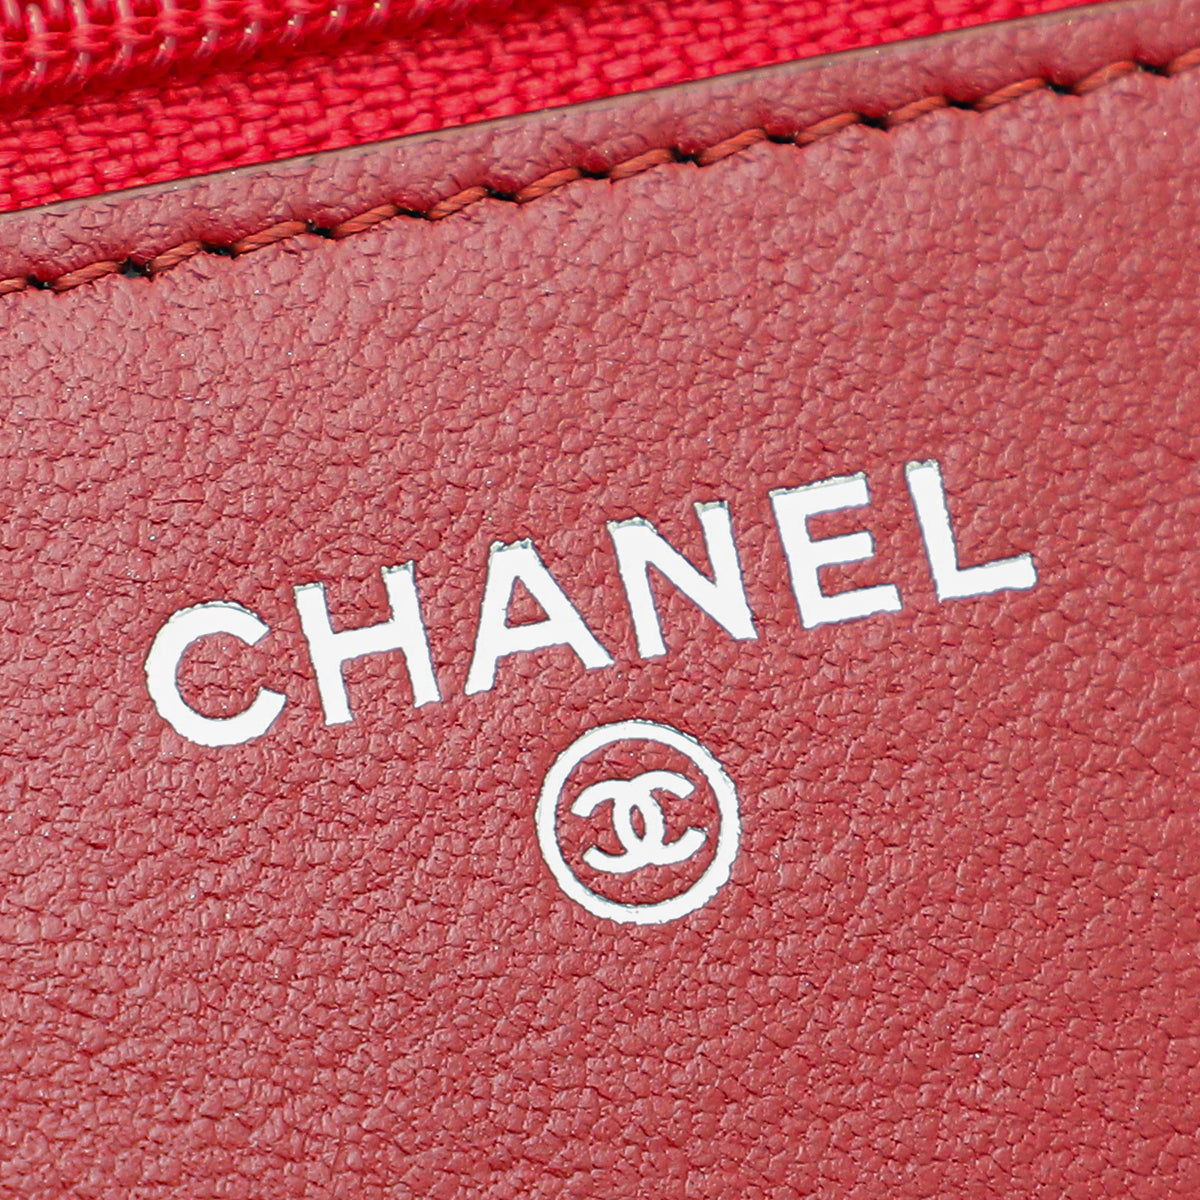 Chanel Red Classic Wallet on Chain